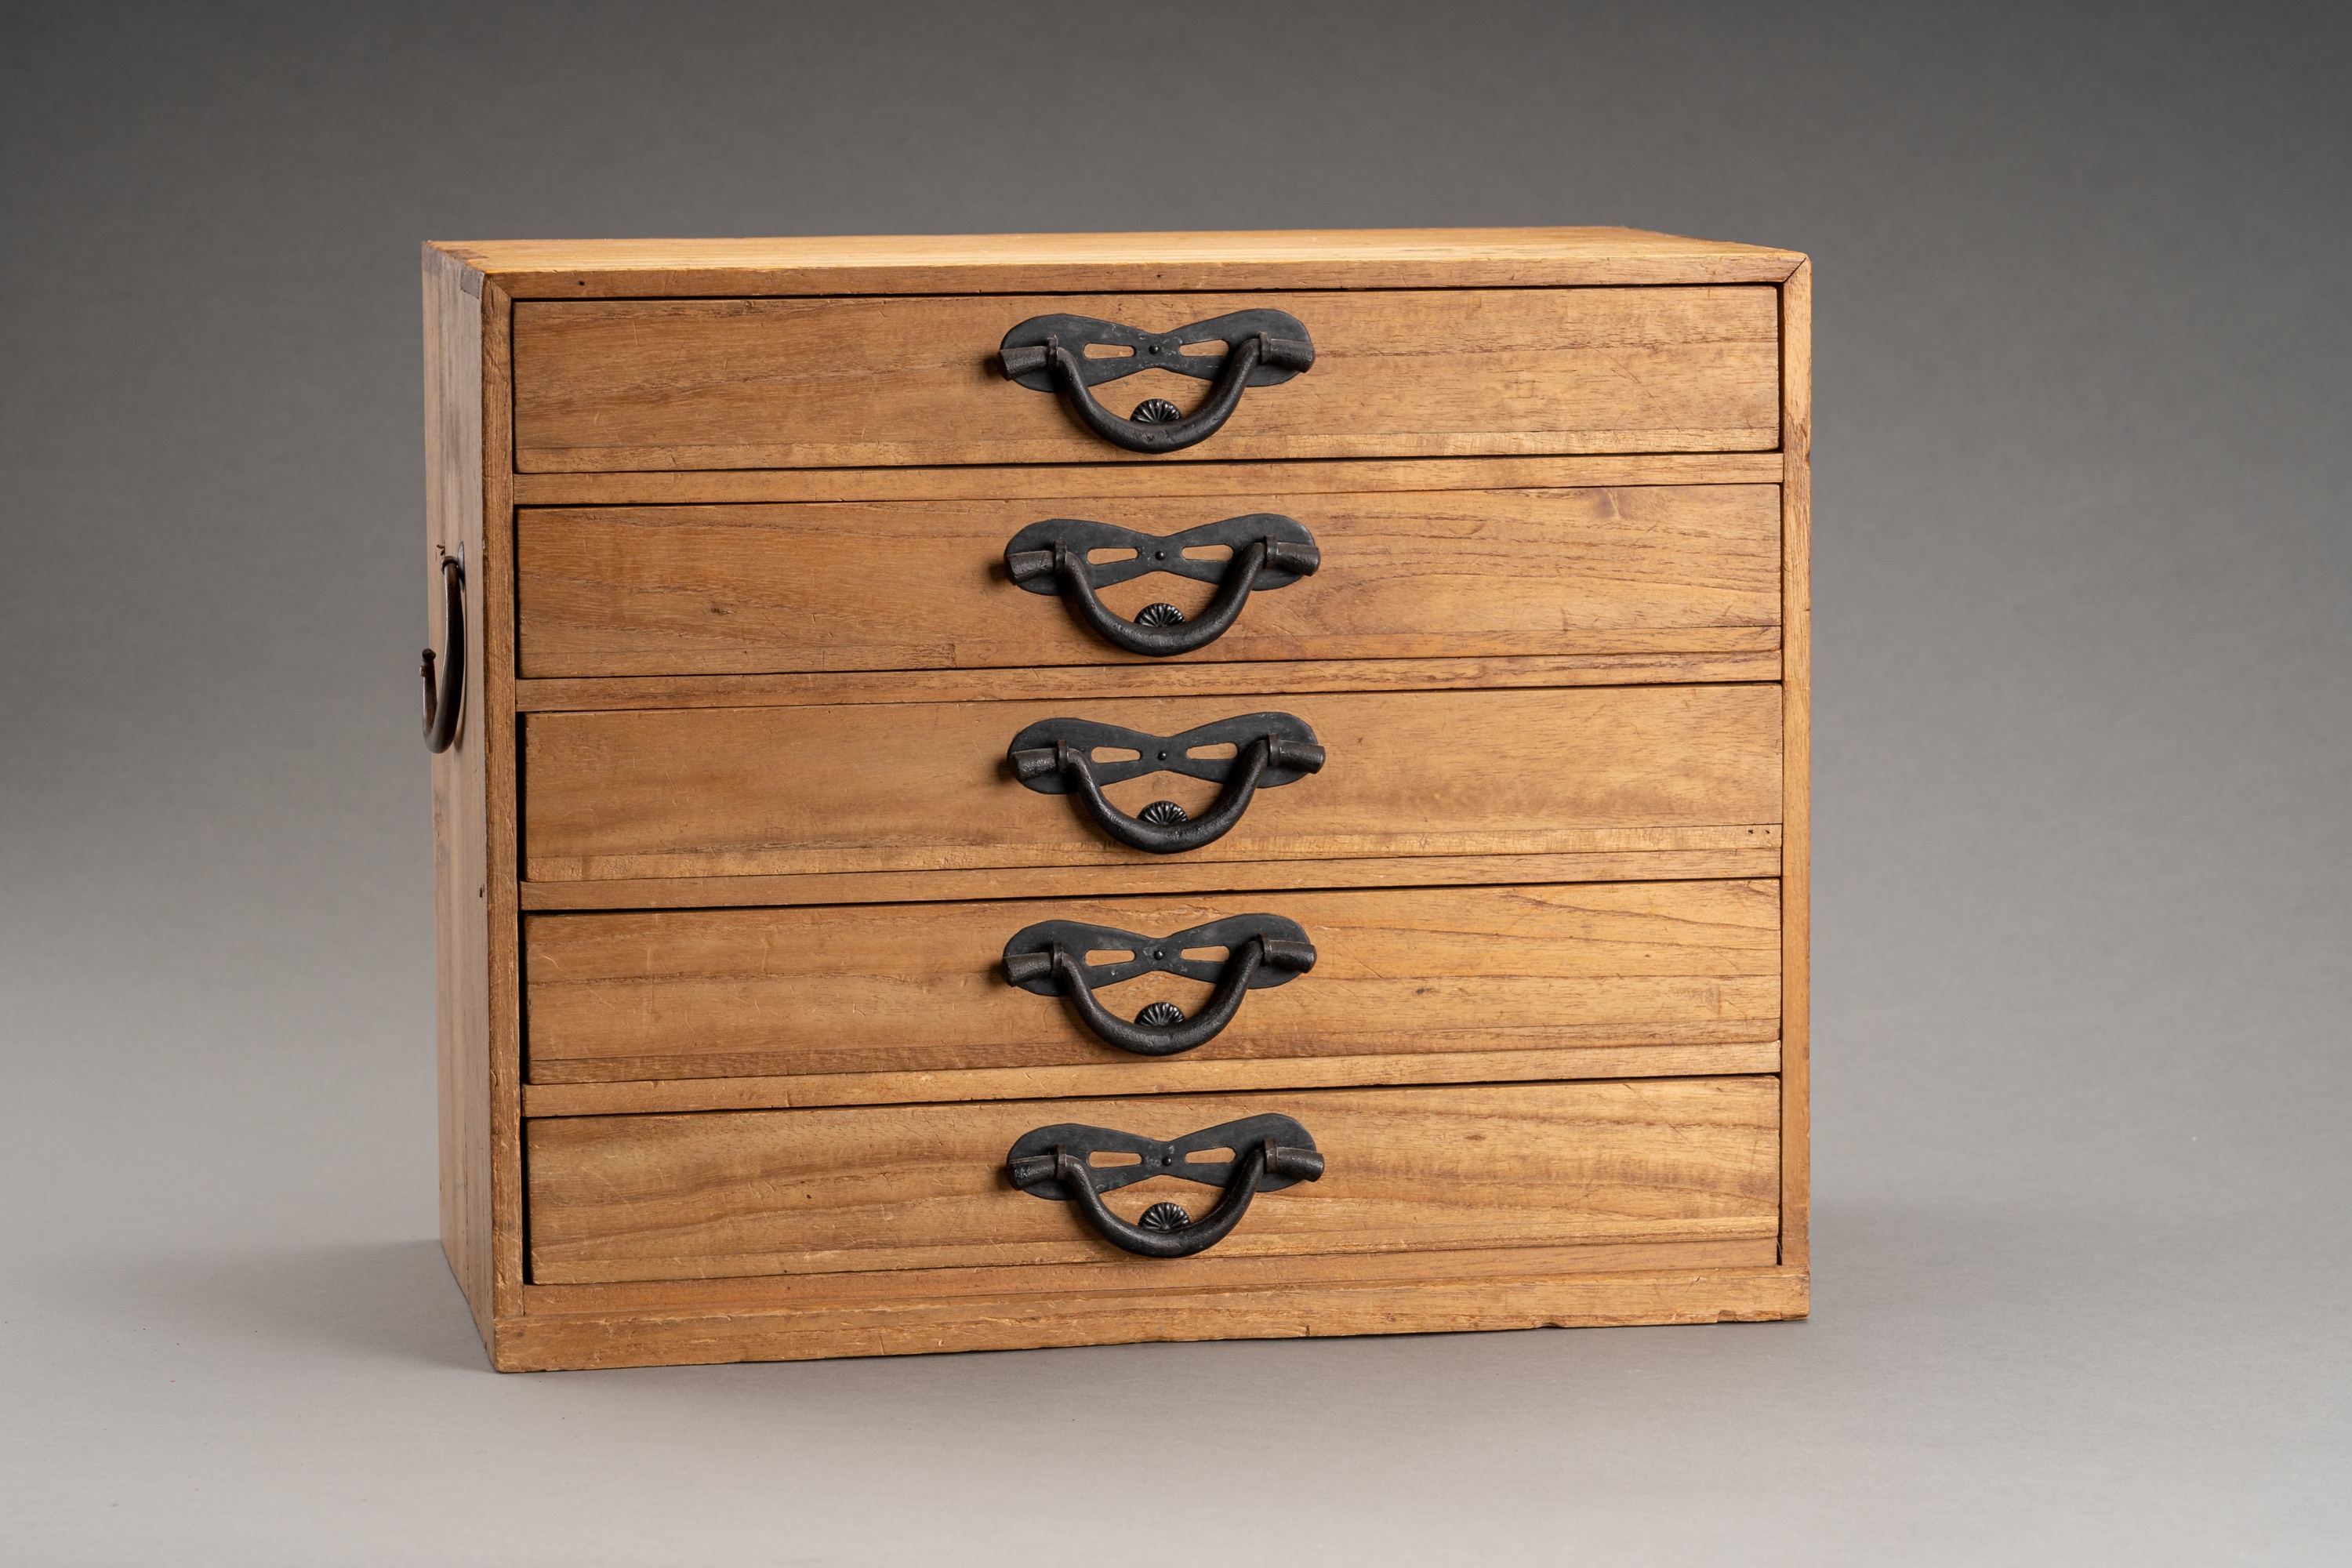 A WOODEN JAPANESE STORAGE BOX WITH 5 DRAWERS - Image 4 of 8